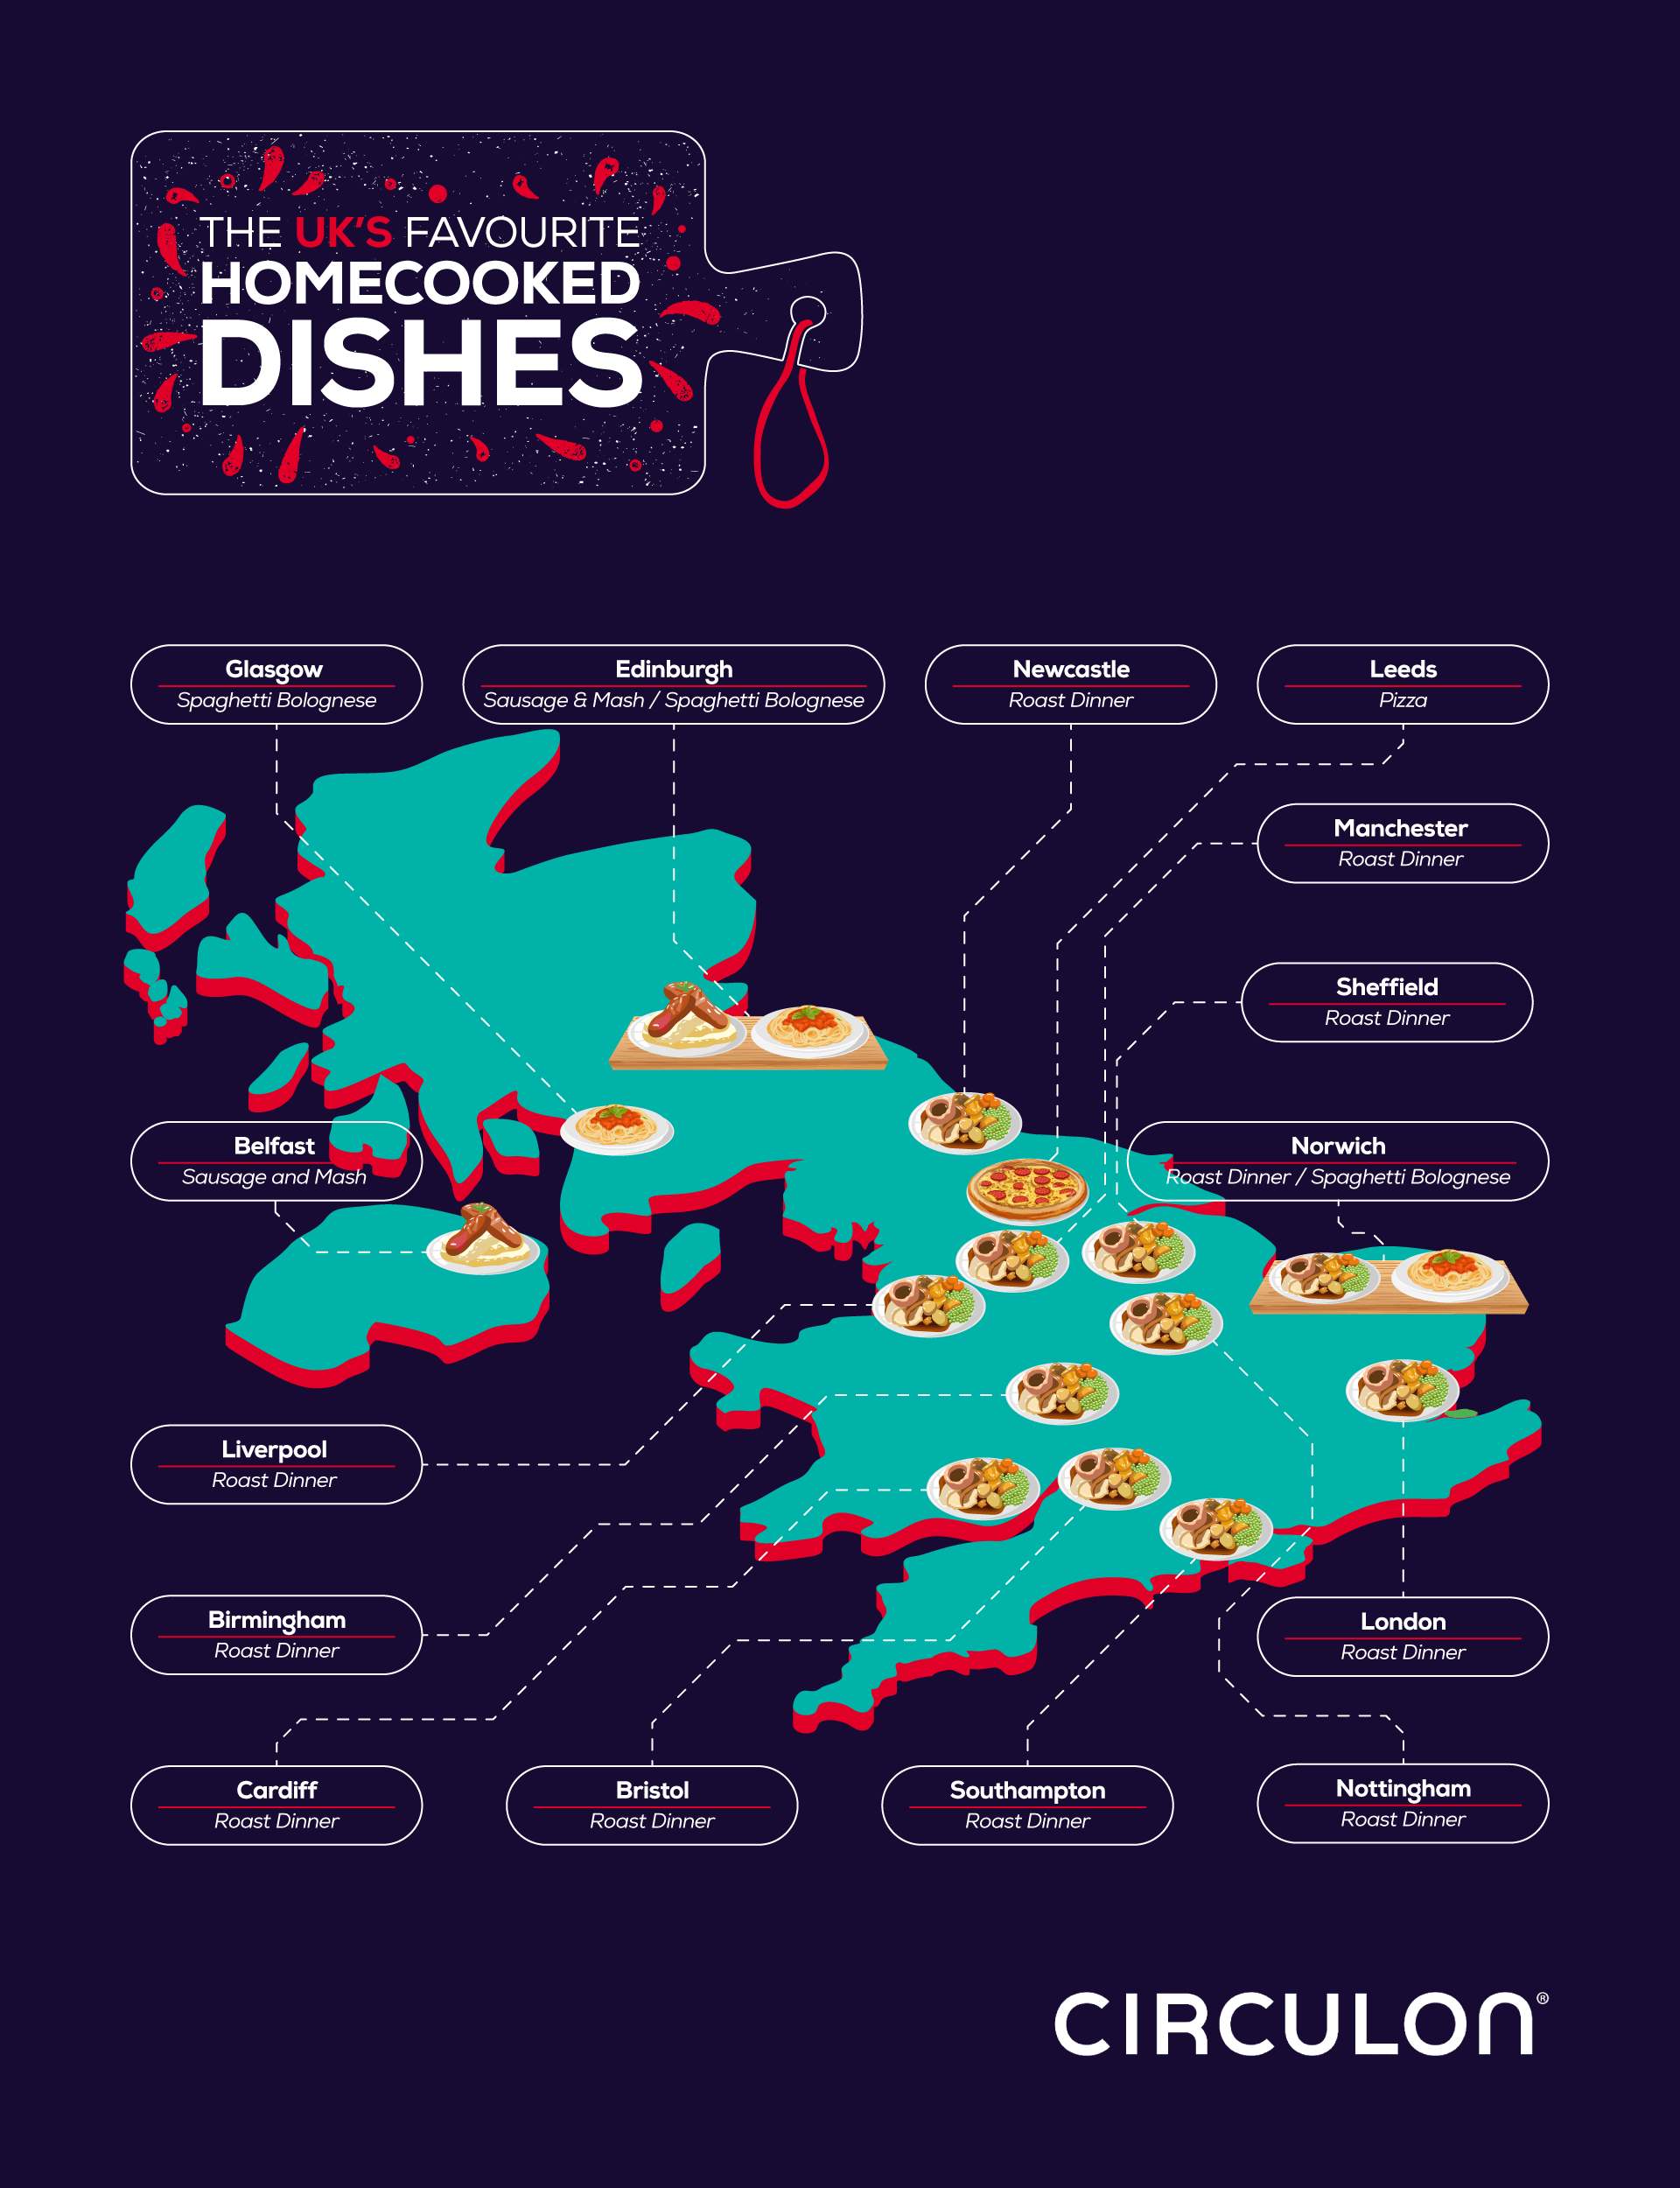 Infographic showing the UK's favourite homecooked dishes